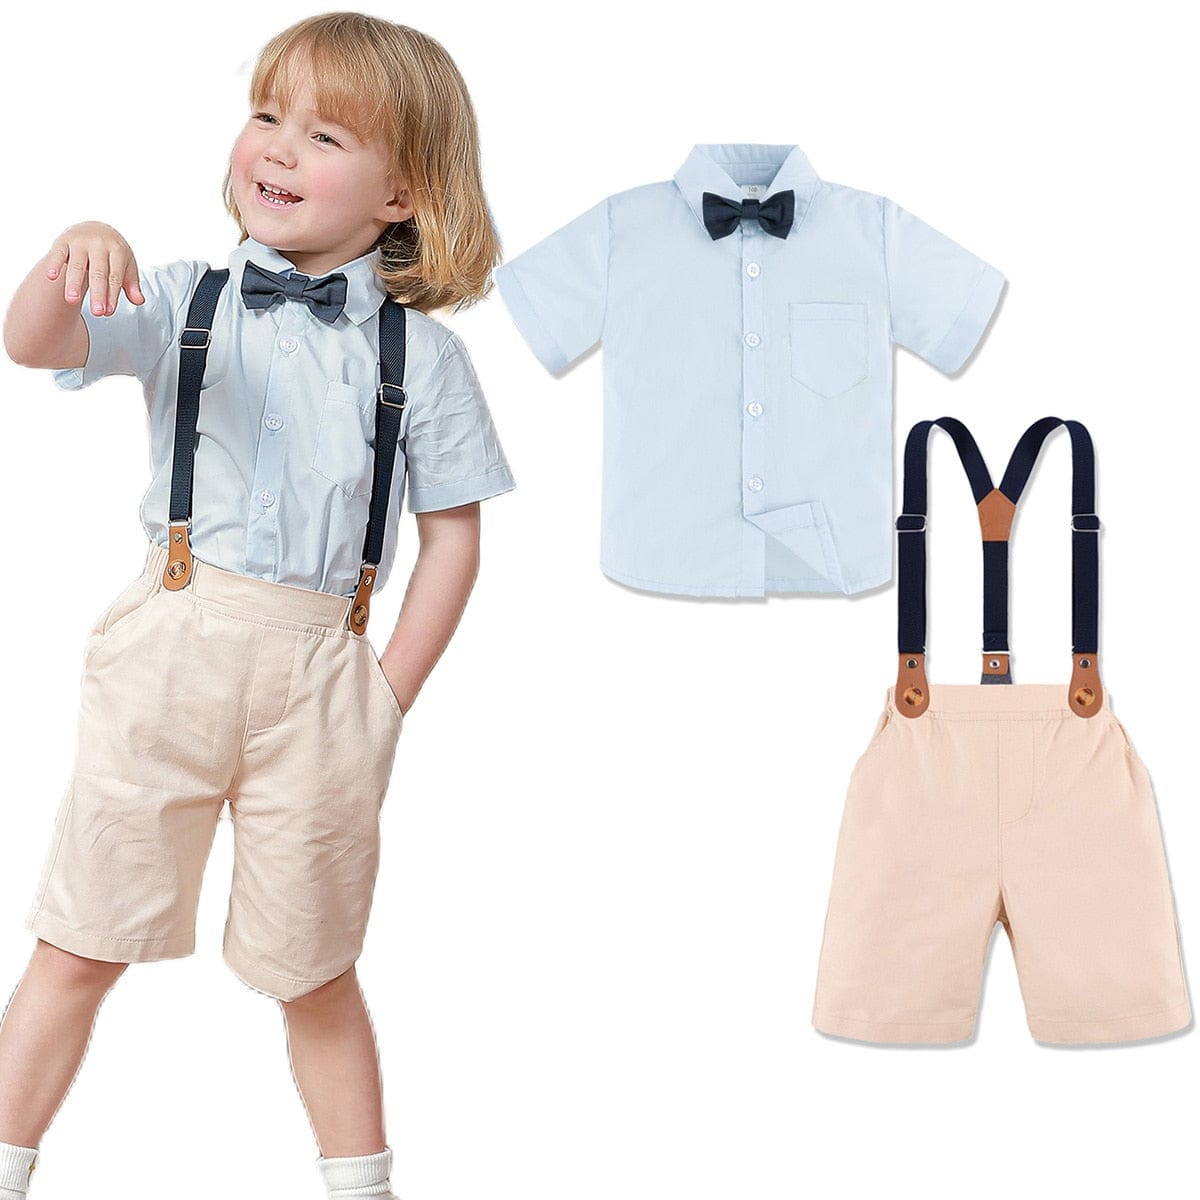 A heartbreaker-to-be, decked out in matching brown suspenders and boat  shoes- the perfect compliment to … | Toddler fashion, Kids fashion boy,  Toddler dress clothes